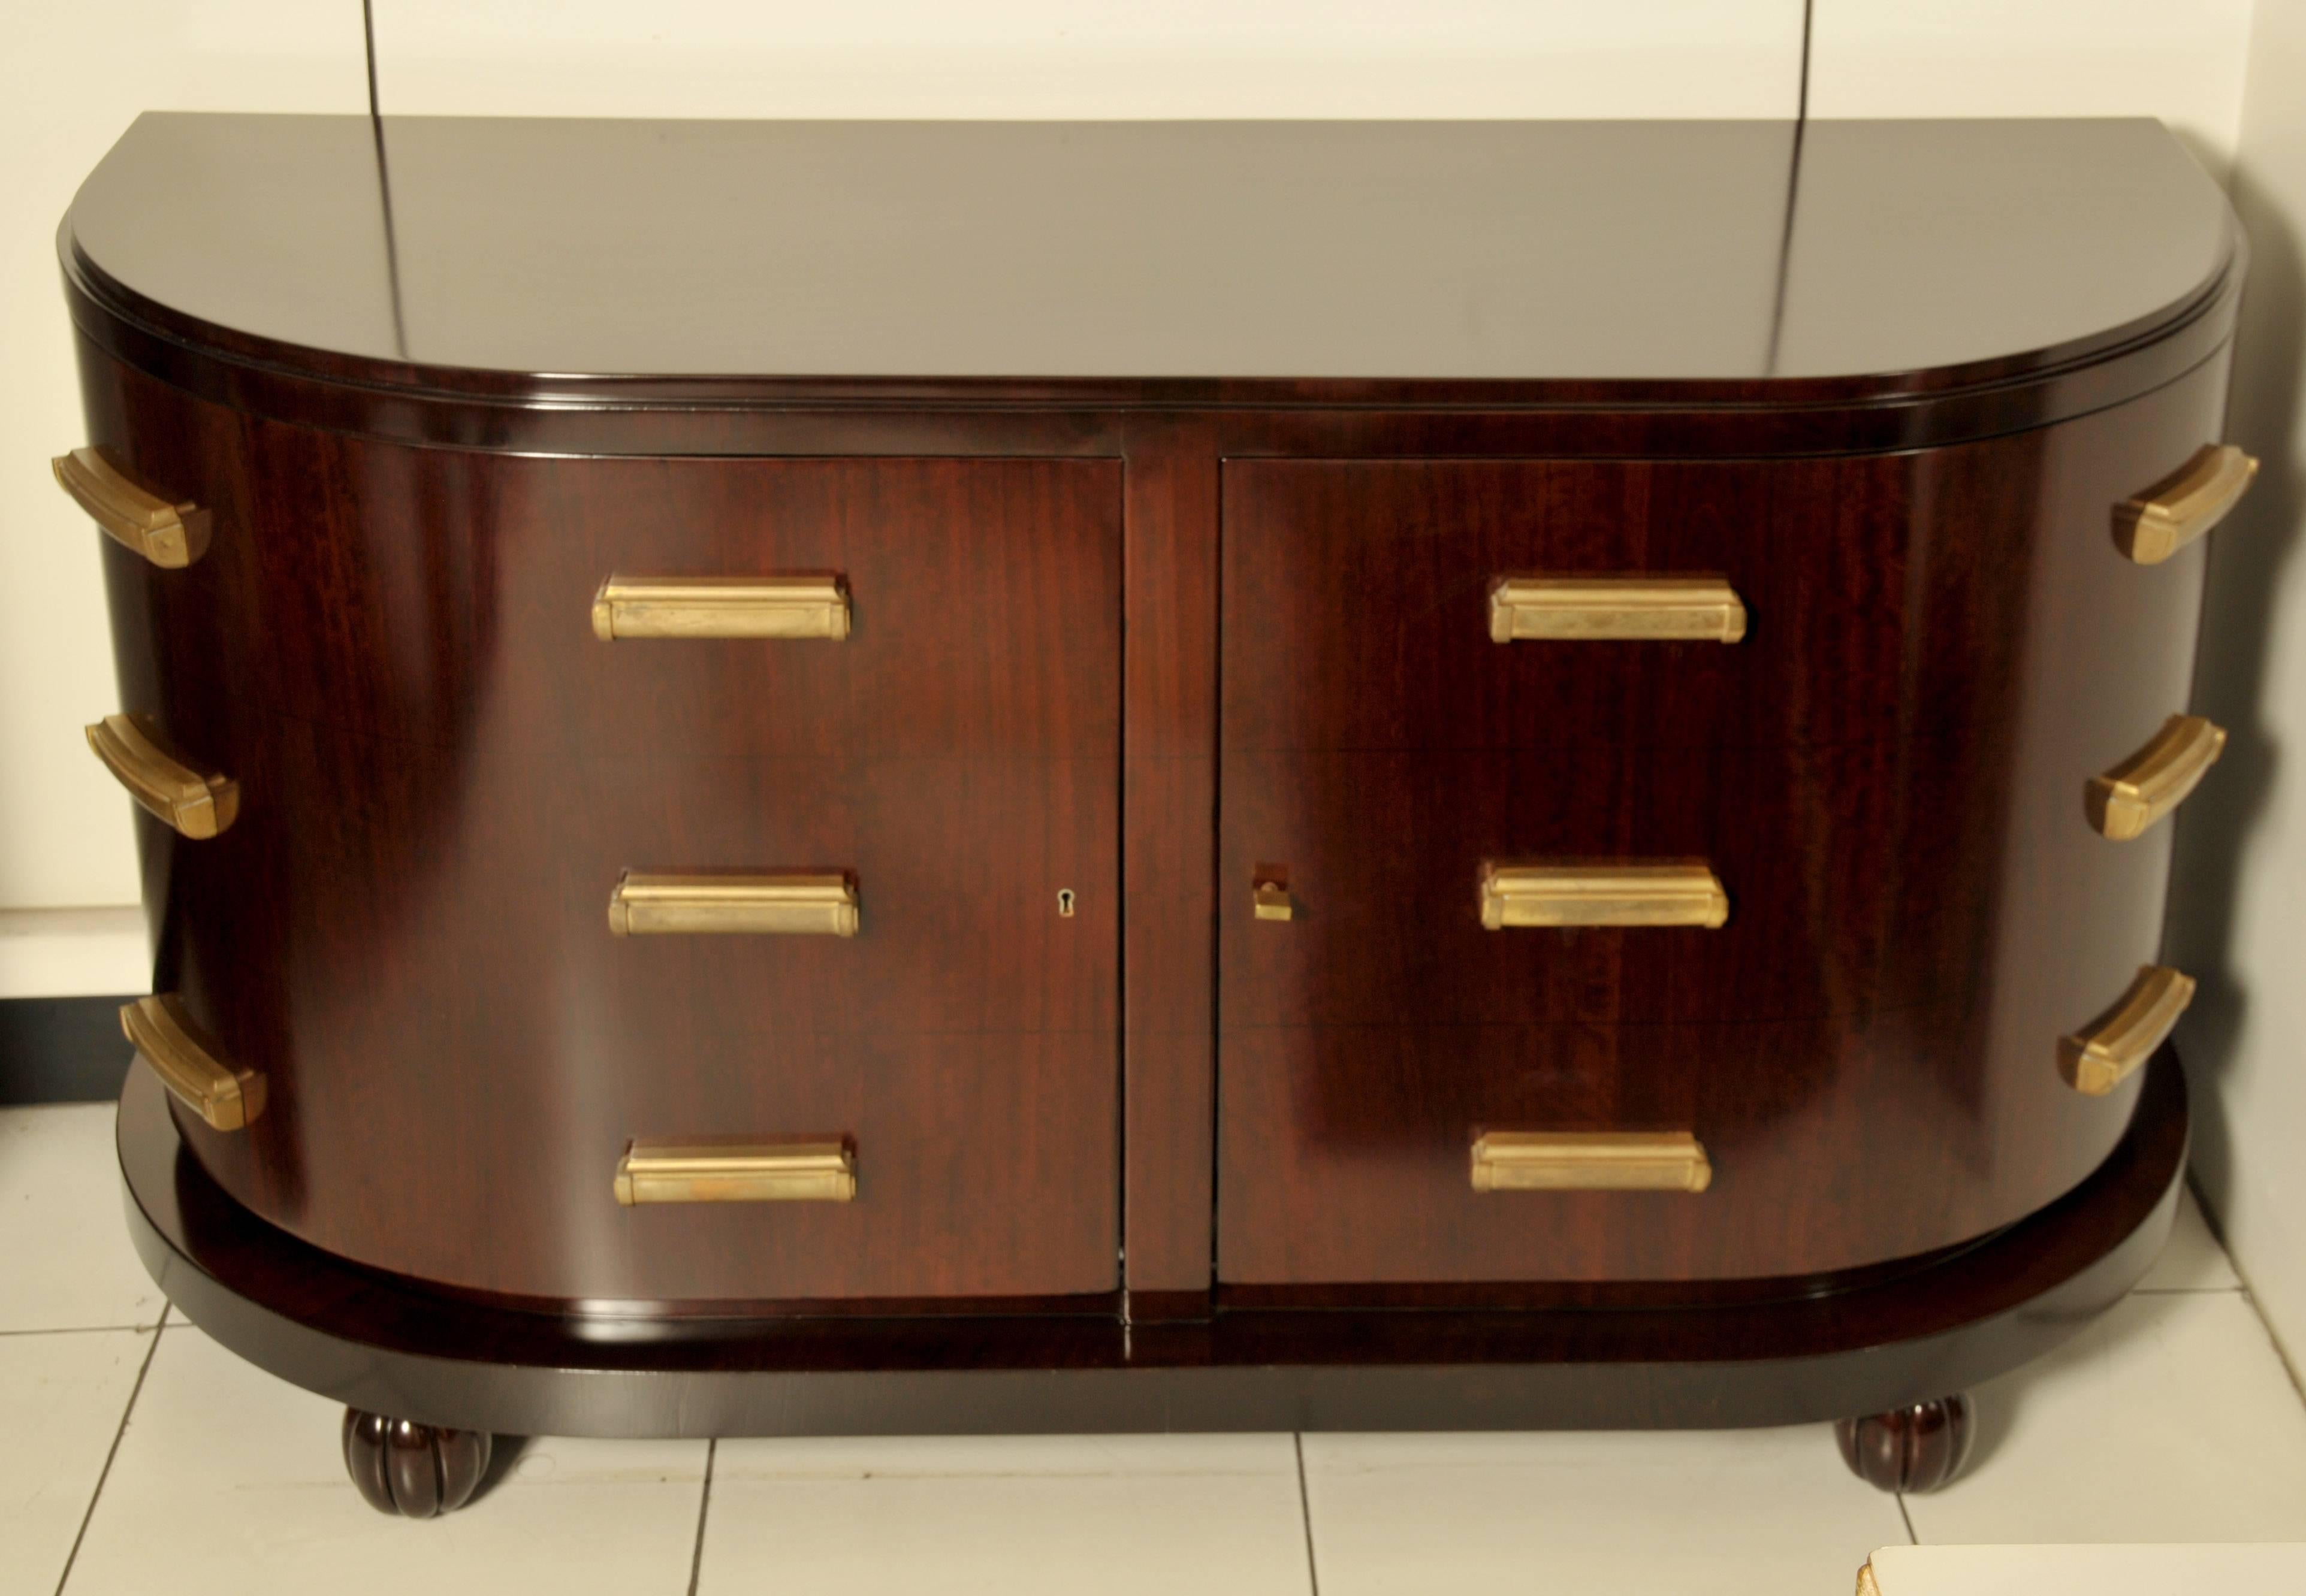 Single chest (commode) in wood. Original gilded bronze handles,
circa 1925.
Restored.

More images available upon request.